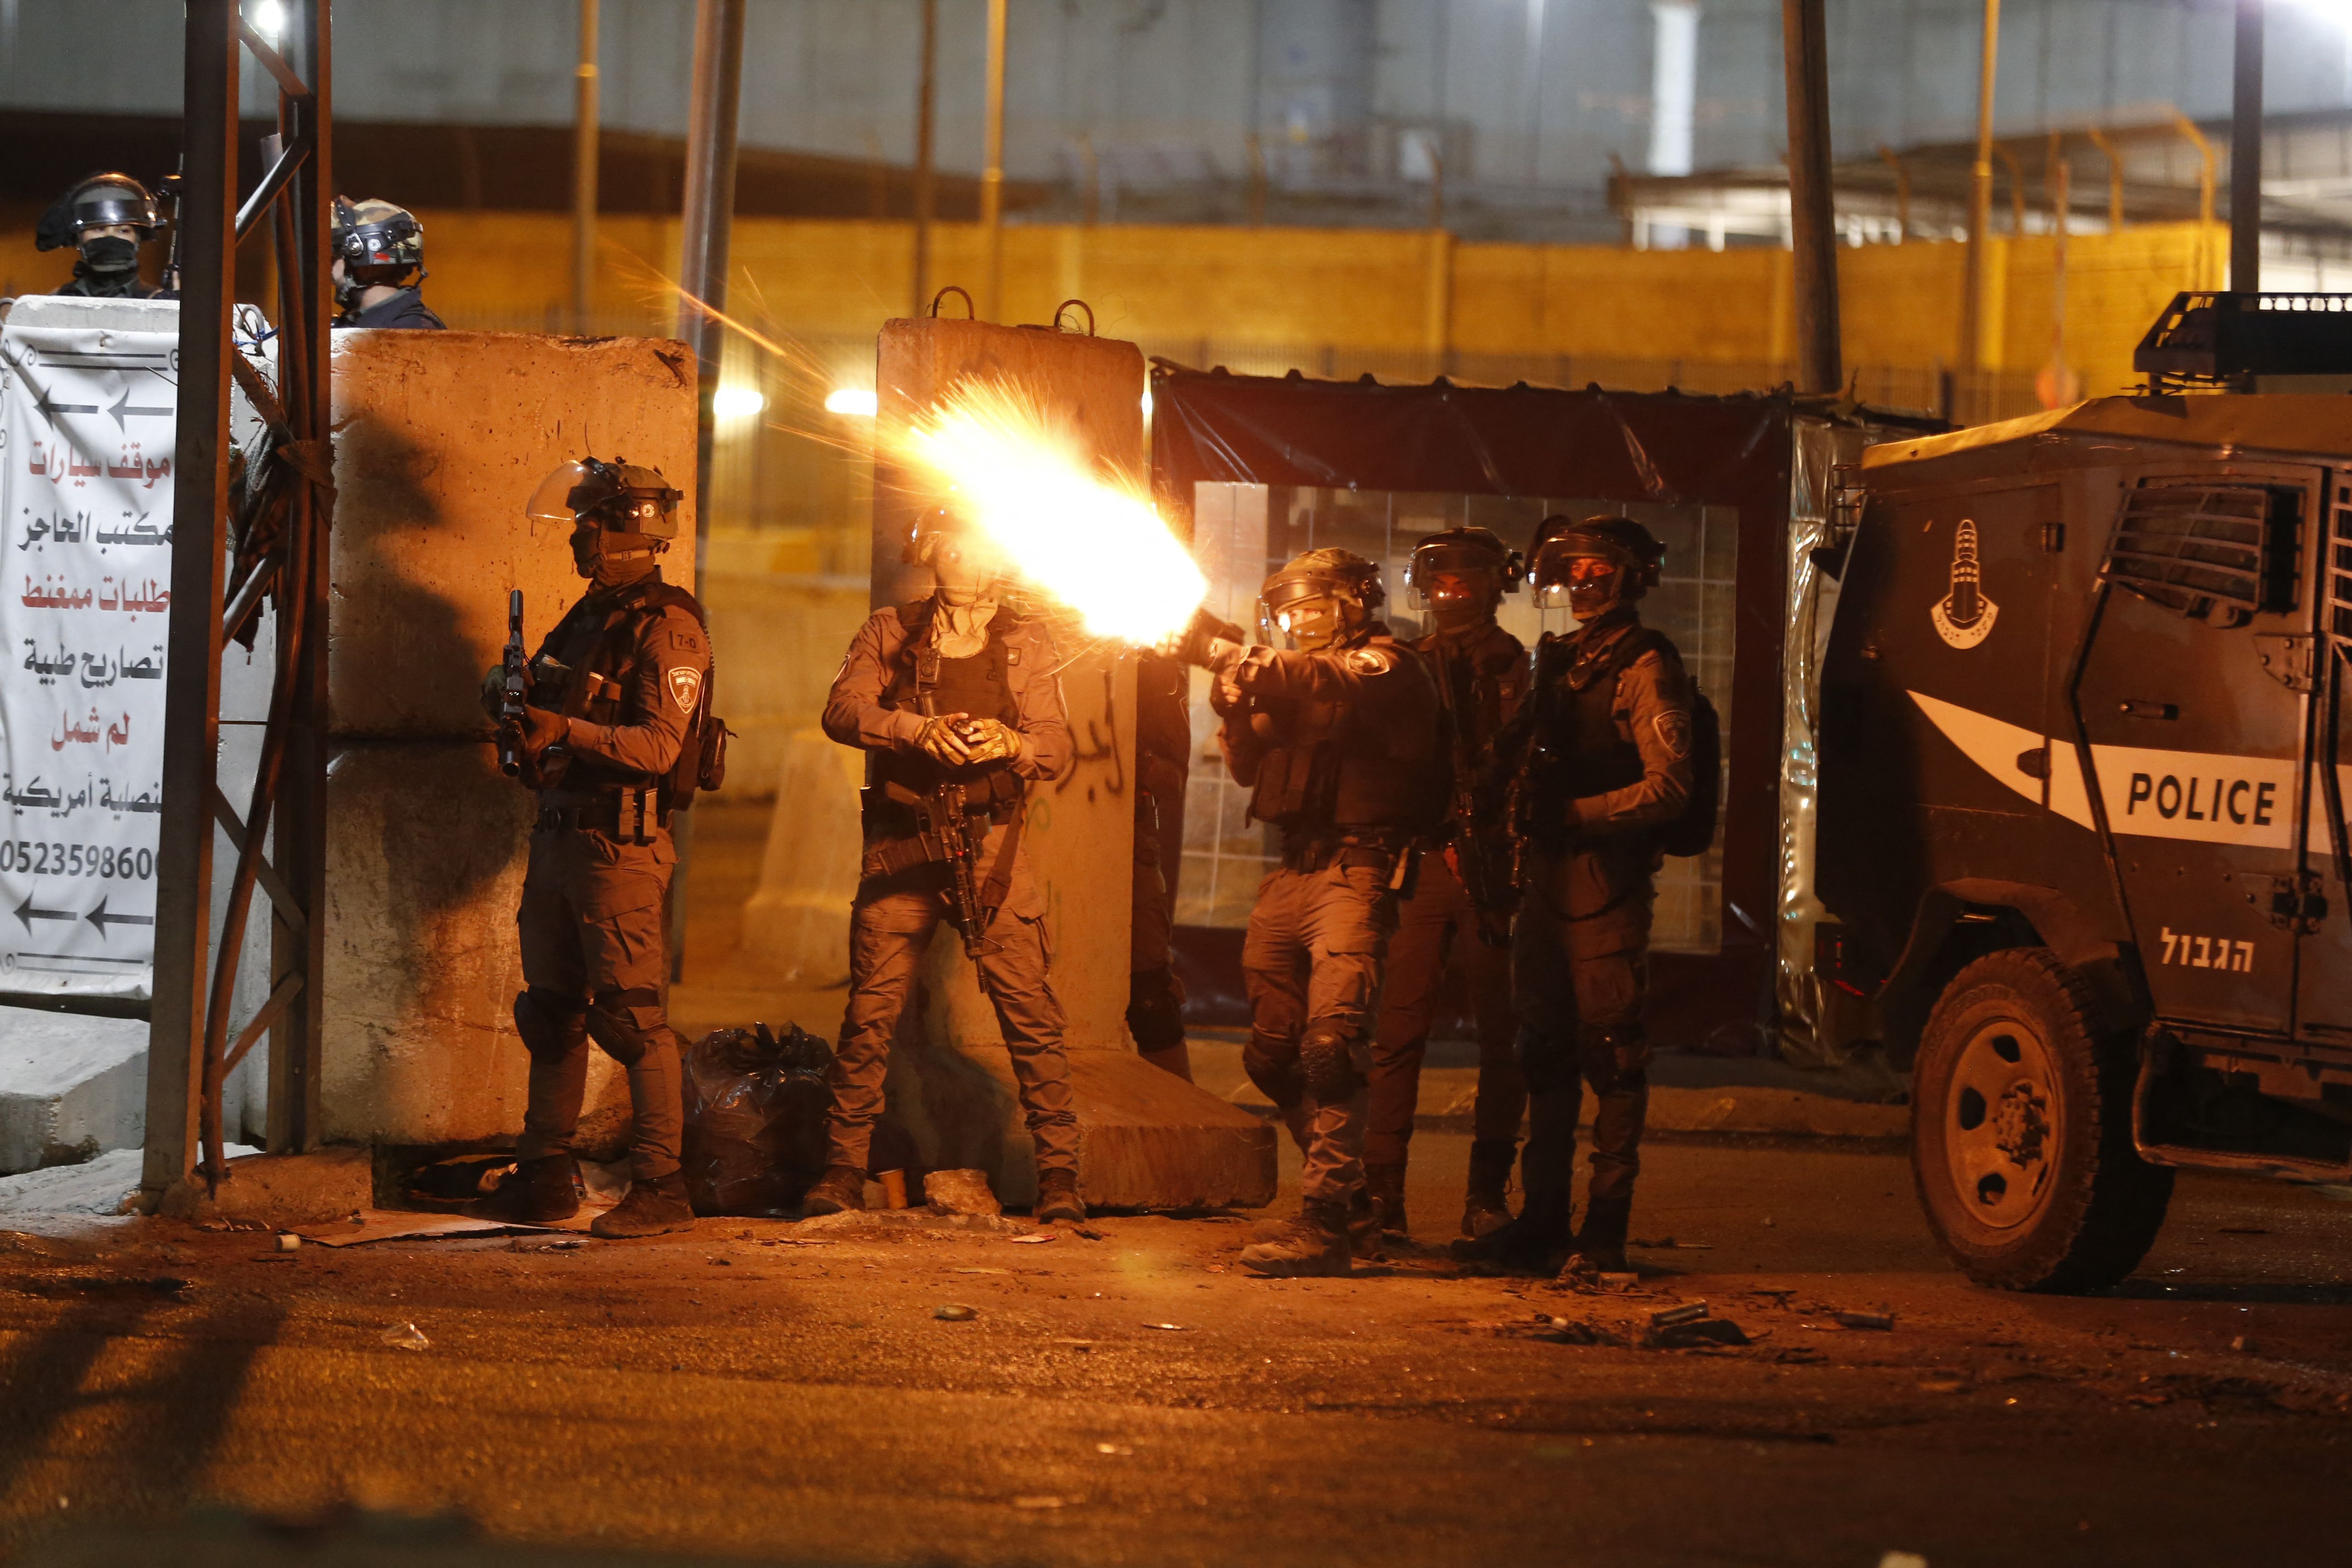  Israeli oldiers fire tear gas at Palestinian demonstrators at the Qalandiya checkpoint between Ramallah and Jerusalem, in the occupied West Bank, on May 11. 